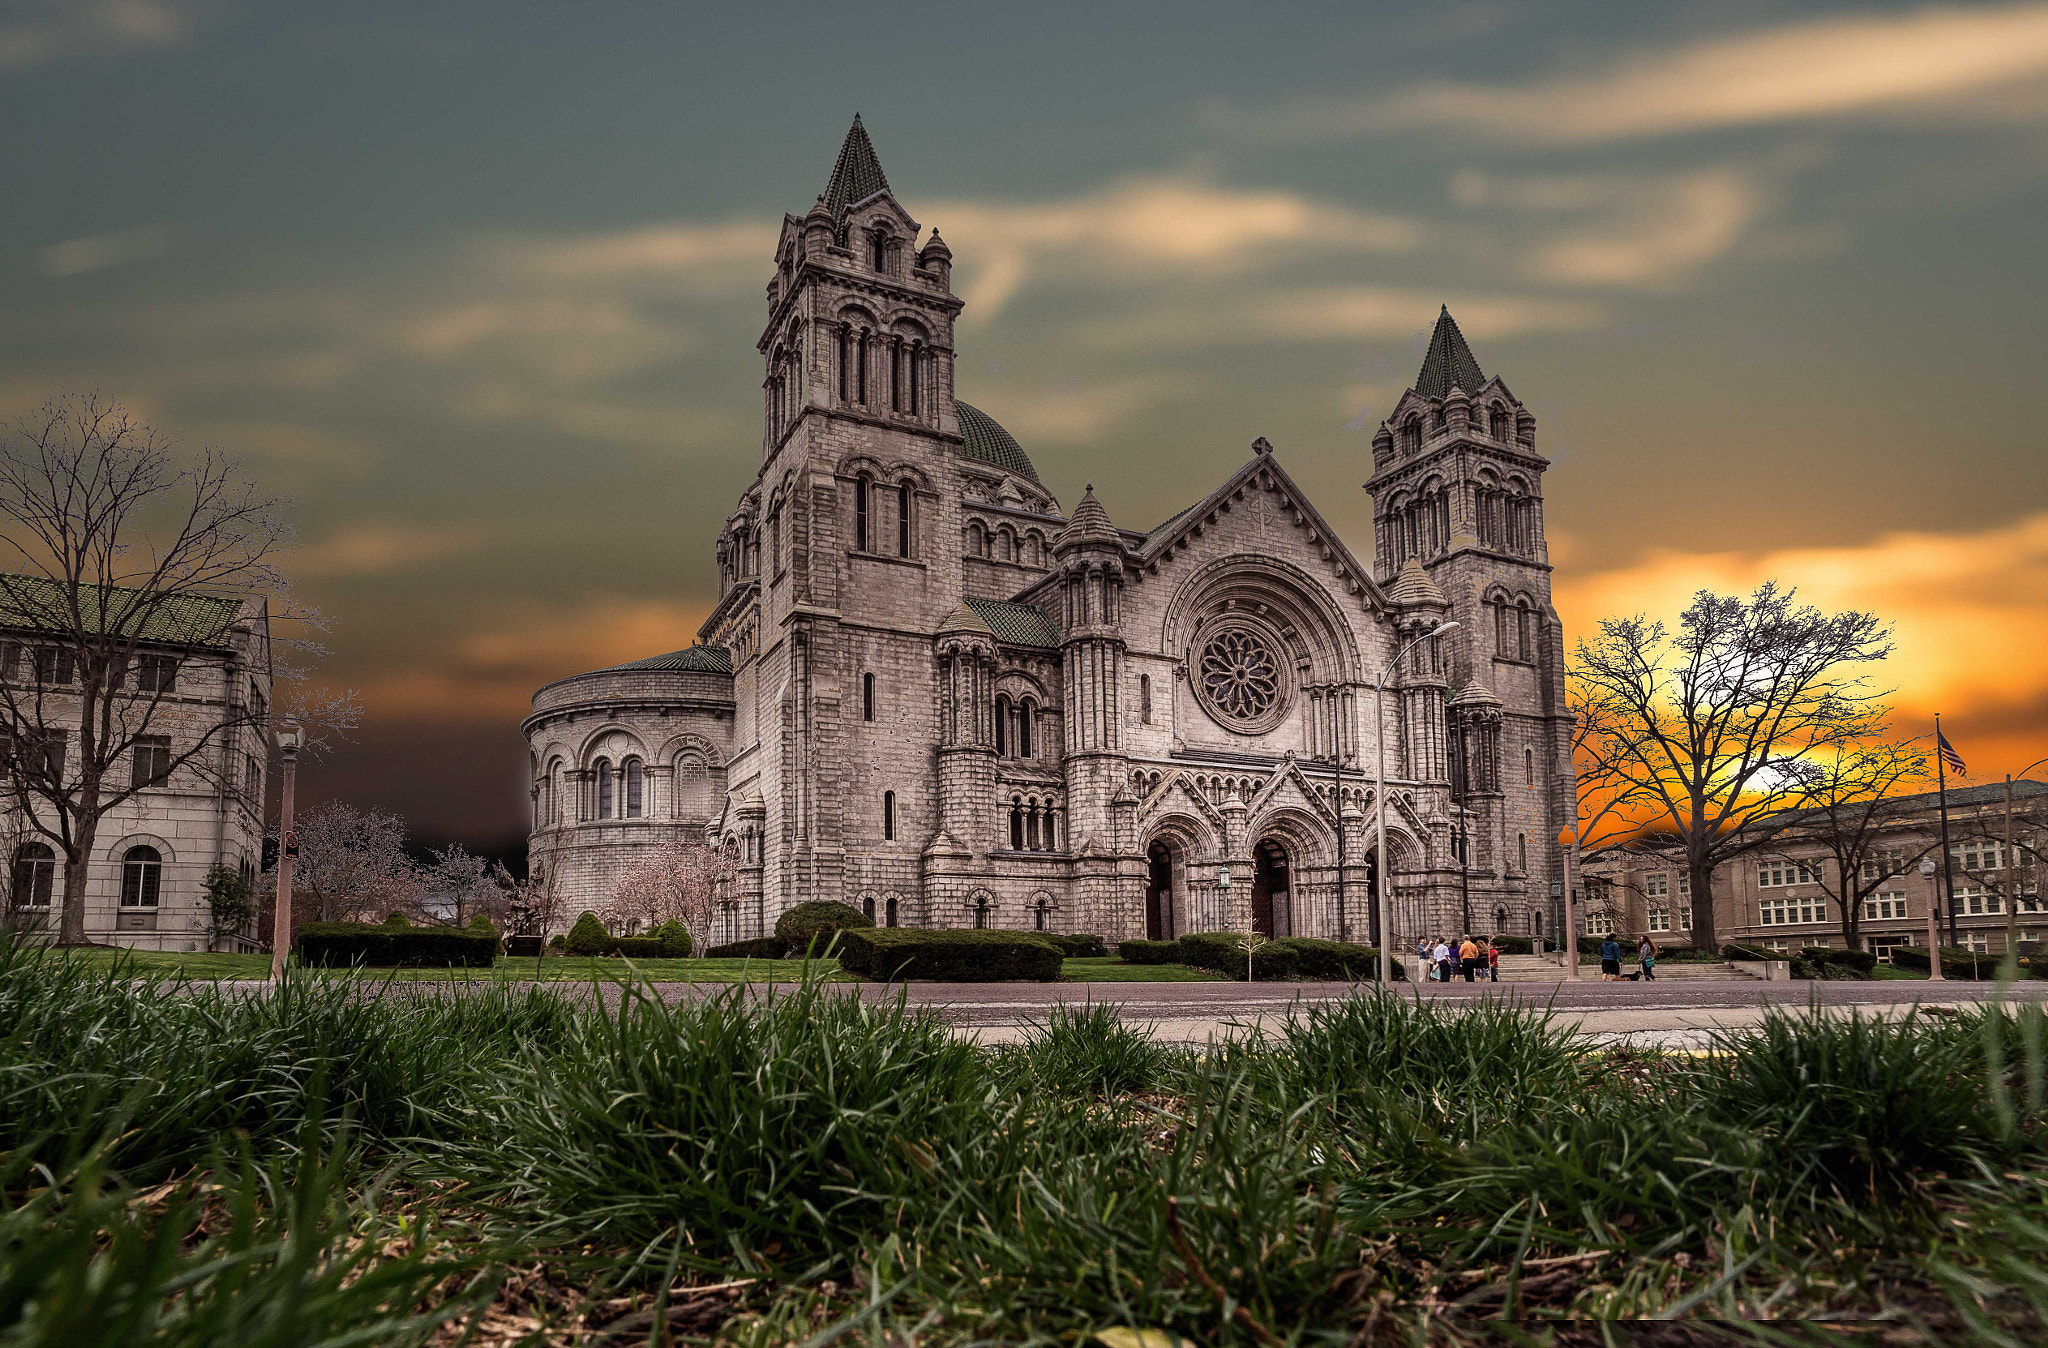 ZEISS Touit 12mm F2.8 sample photo. Cathedral basilica of saint louis, lindell bouleva photography